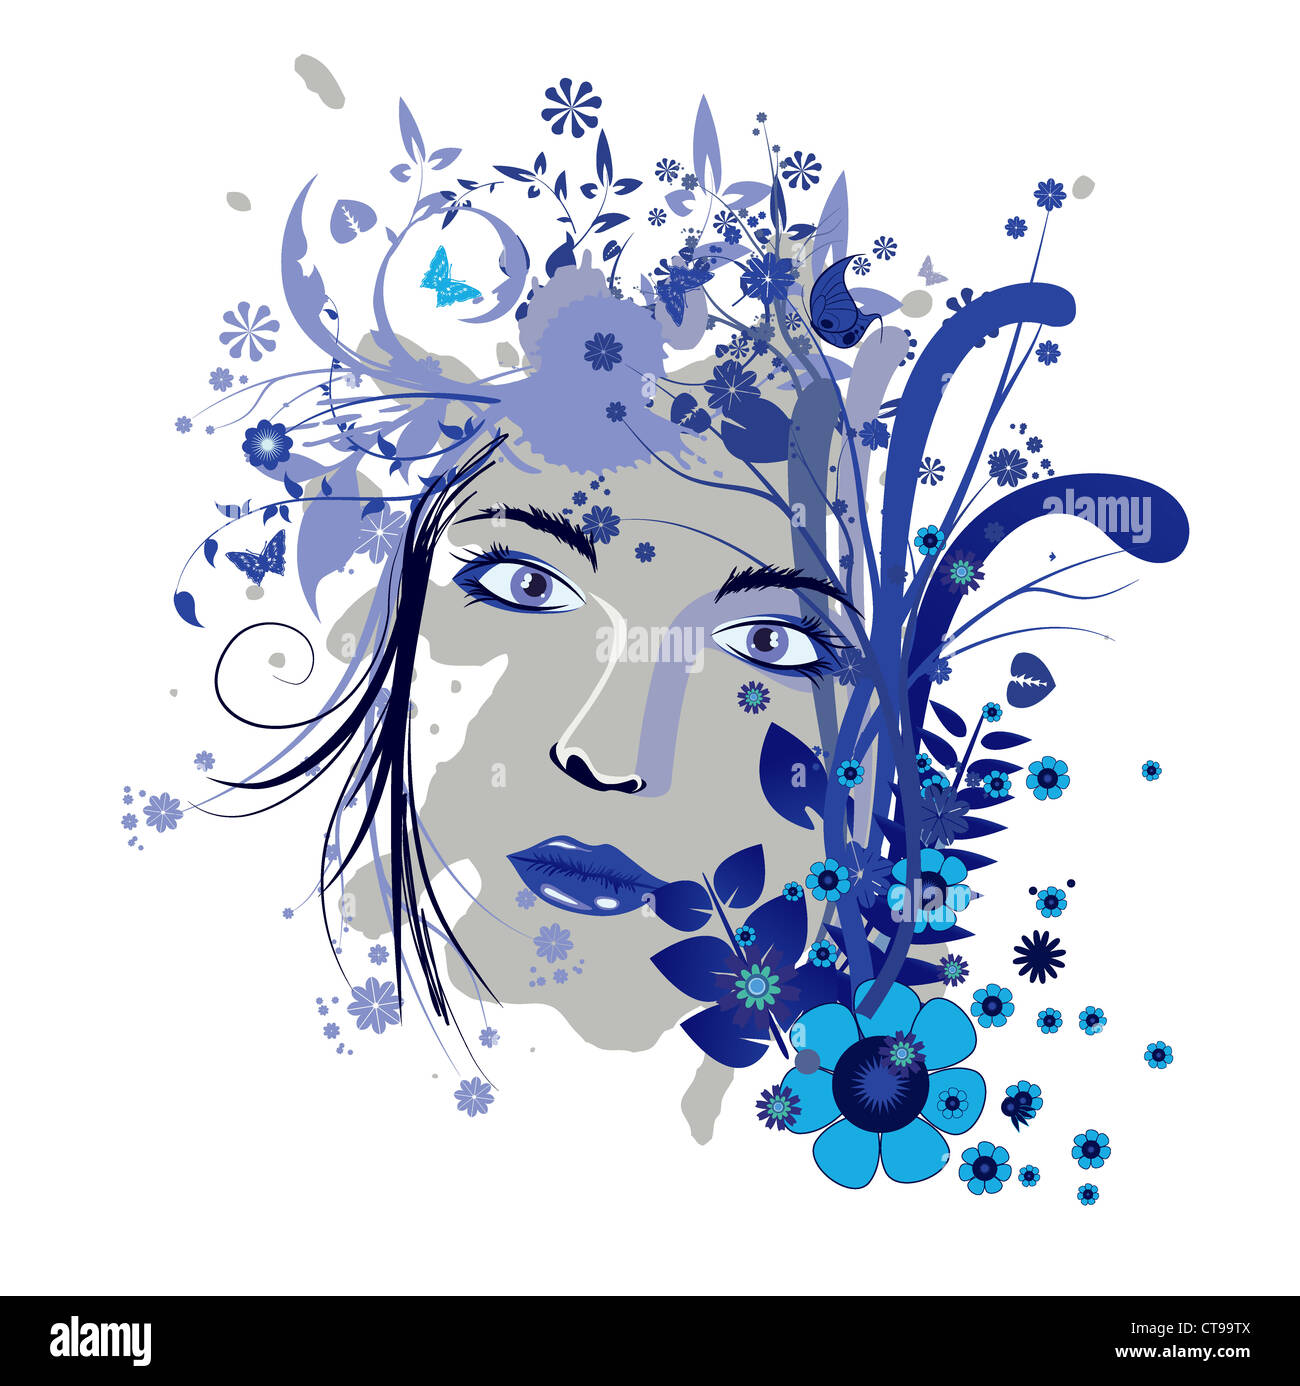 abstract illustration of a lady's face with floral Stock Photo